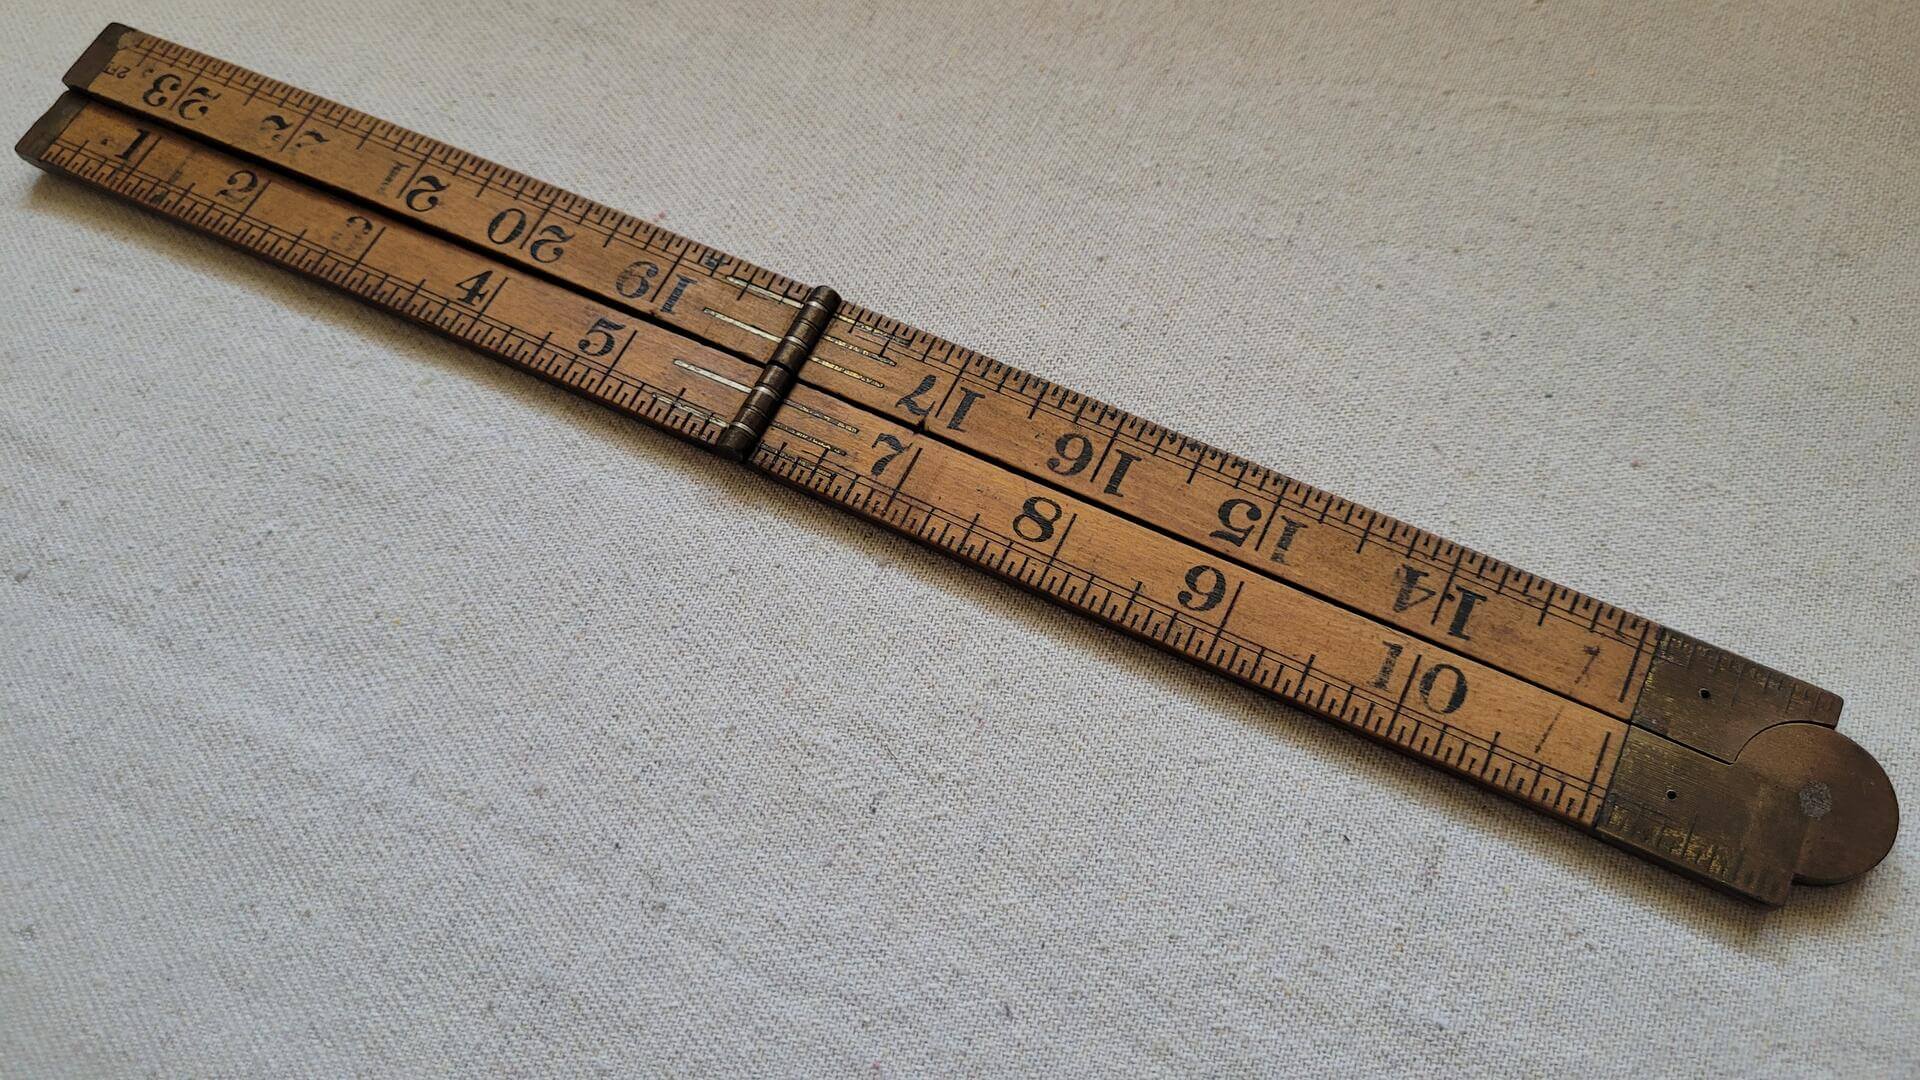 Vintage Rabone No. 6080 warranted boxwood and brass folding ruler two feet long. Rare antique made in England collectible yardstick and measuring tool